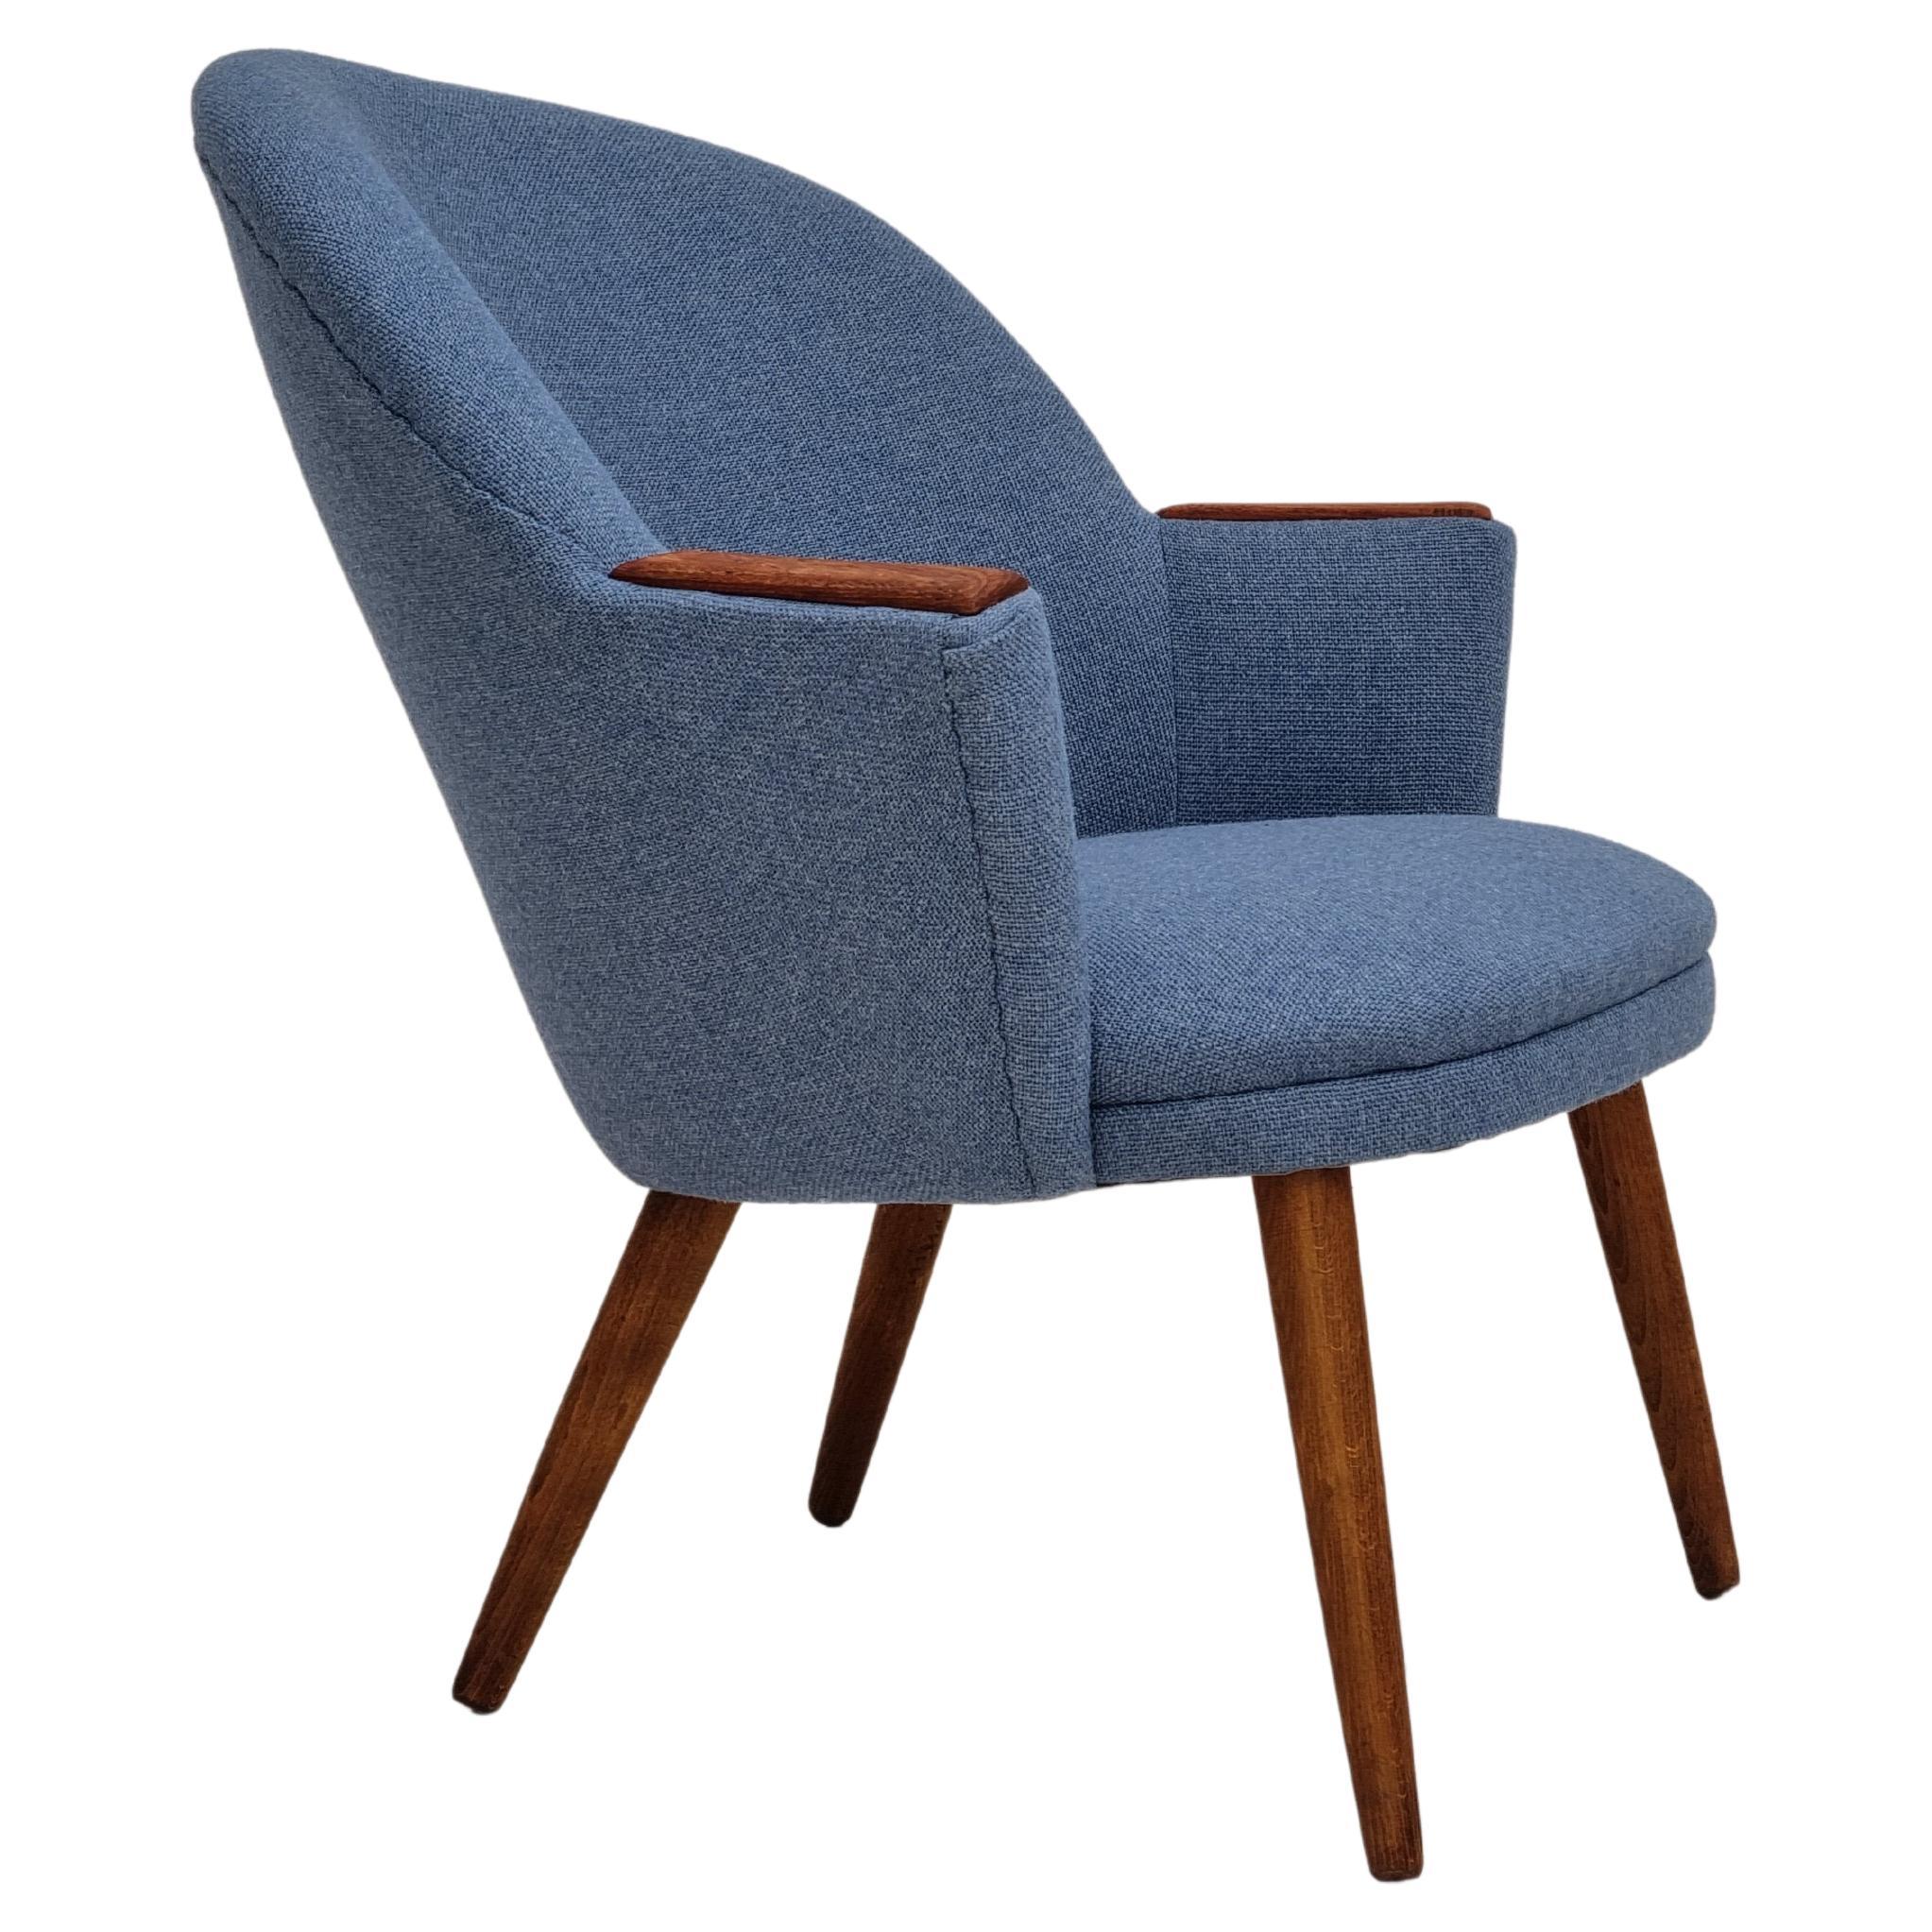 1960s, Danish Design, Completely Reupholst Lounge Chair, Camira Furniture Wool For Sale